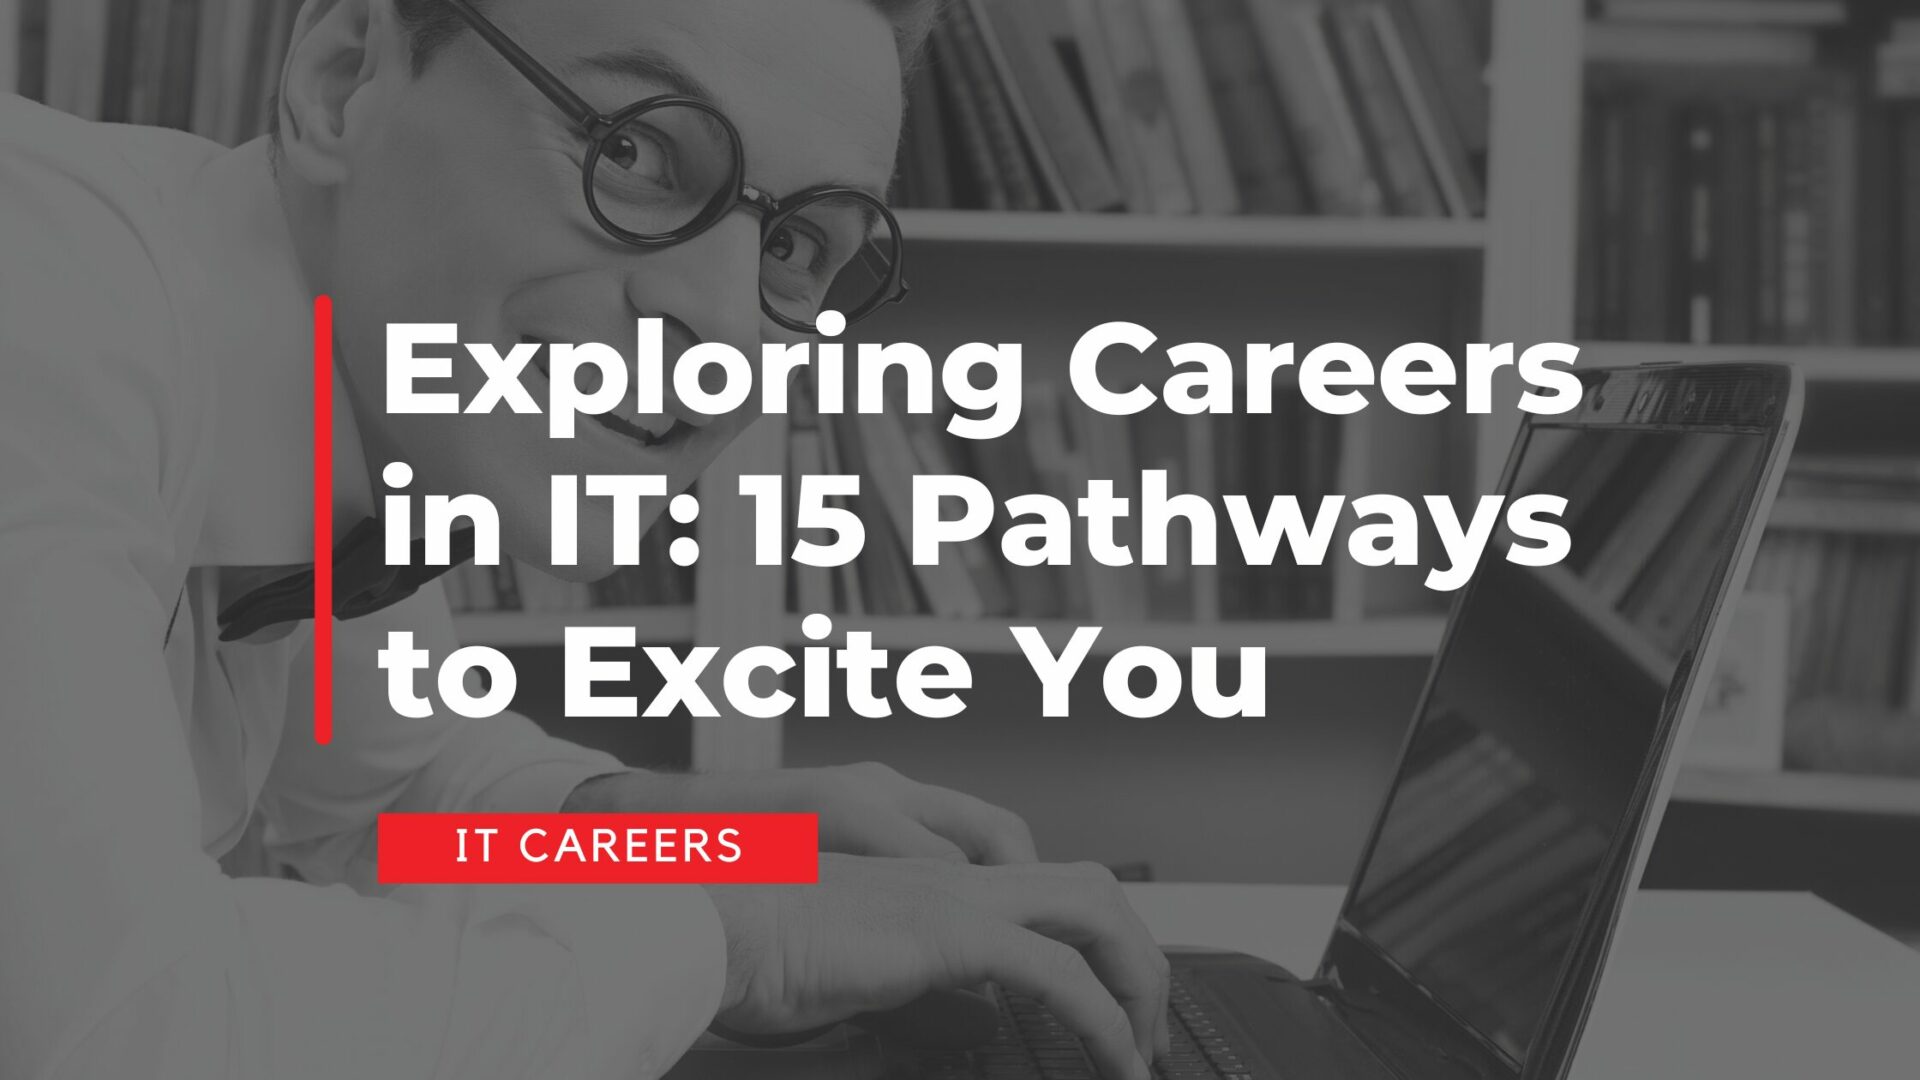 Exploring Careers in IT: 15 Pathways to Excite You